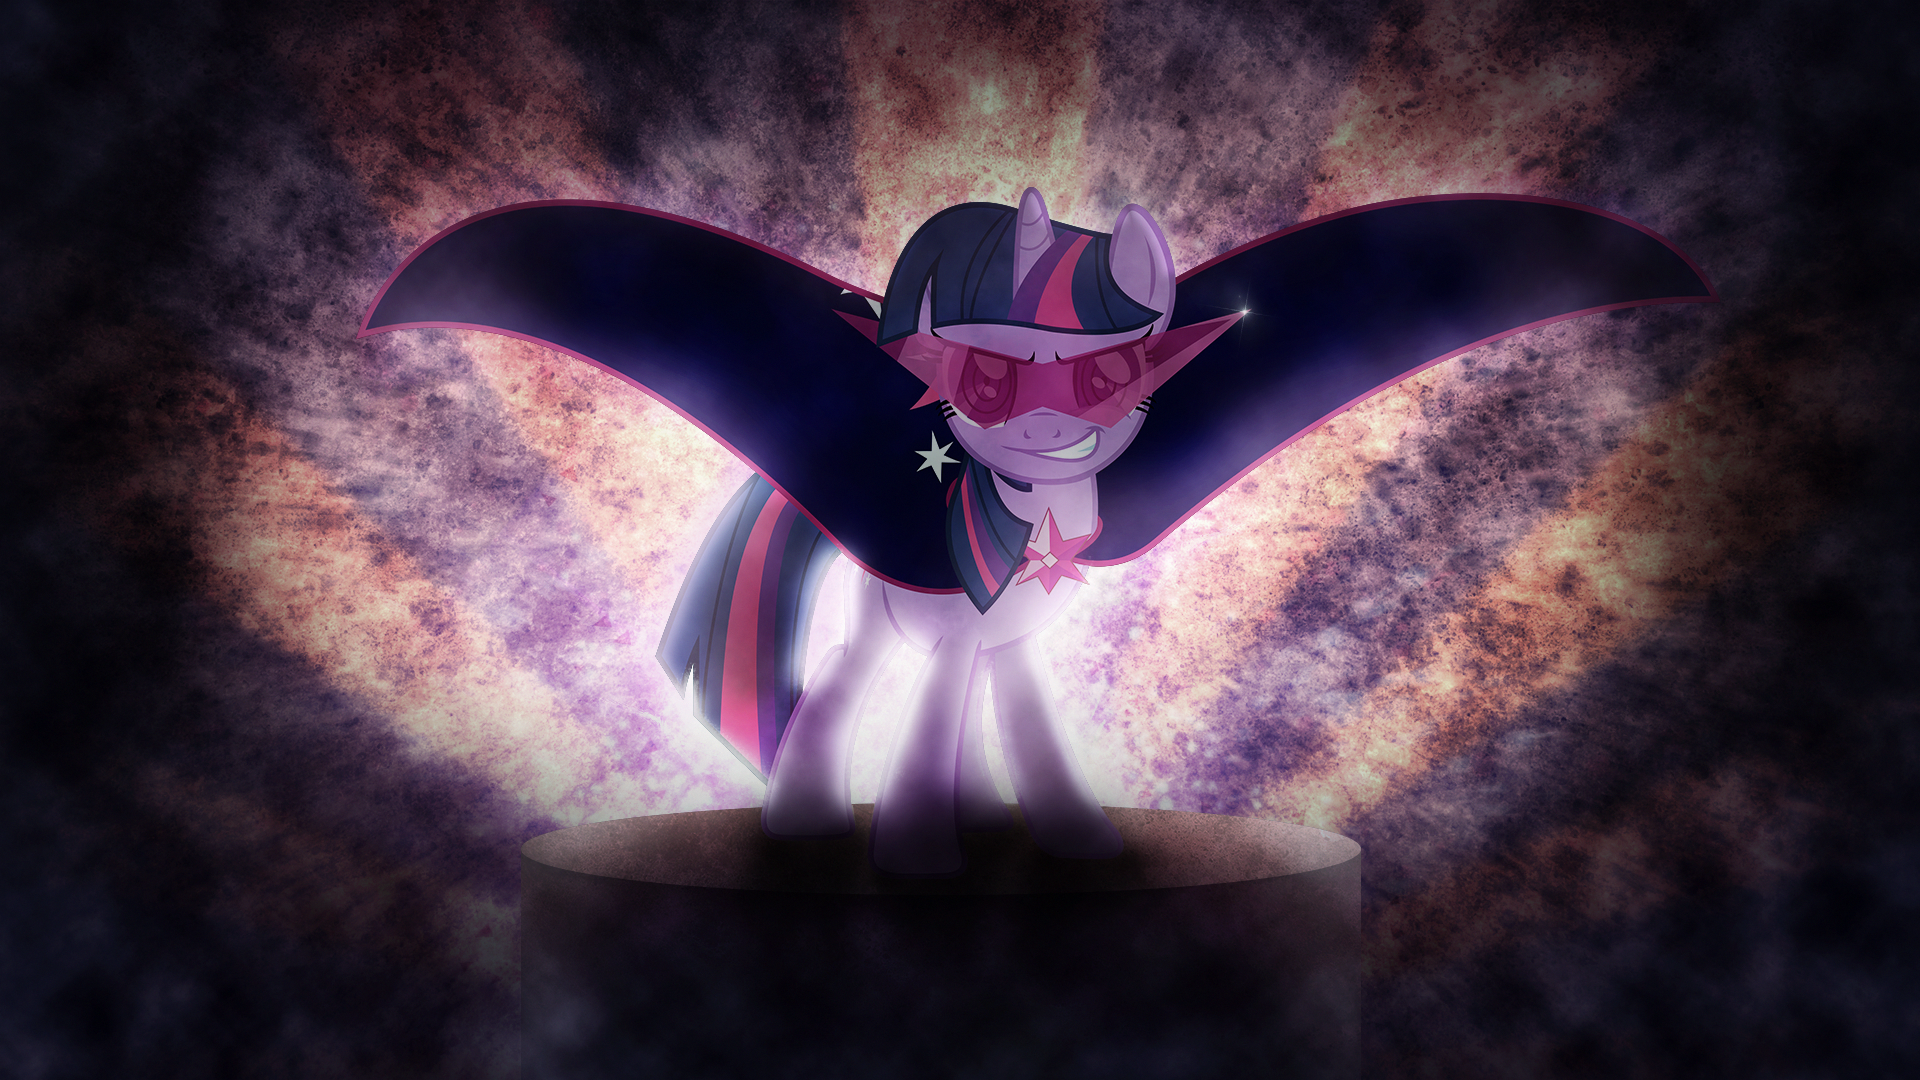 Wallpaper ~ Twilight. by Kired25 and Mackaged